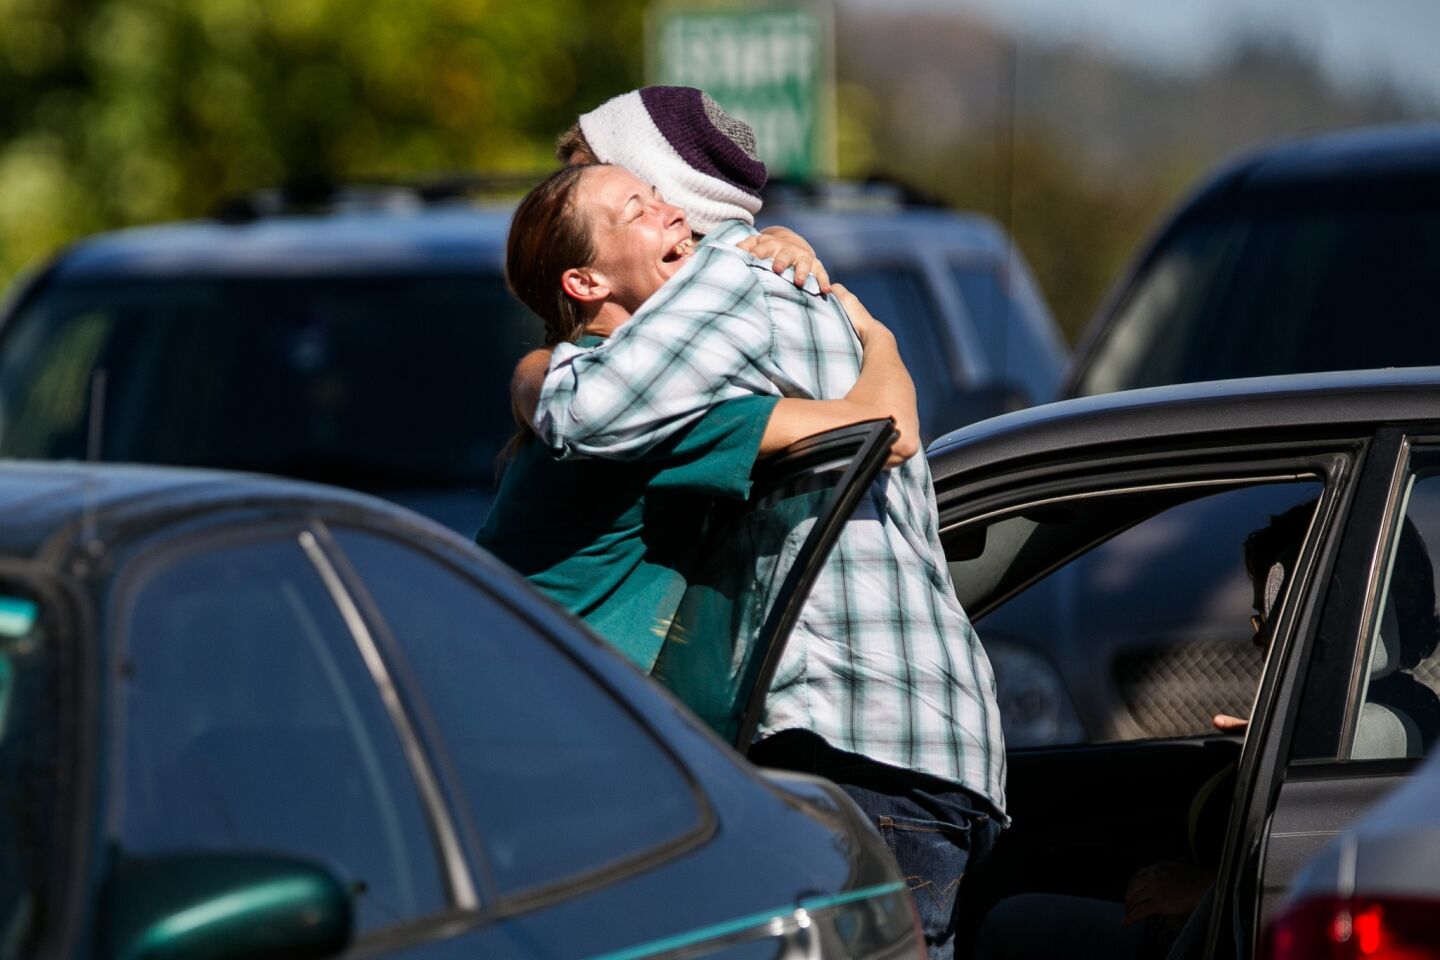 Mathew Downing, right, a survivor of the Umpqua Community College mass shooting, gets a hug as soon as he arrives back on campus.